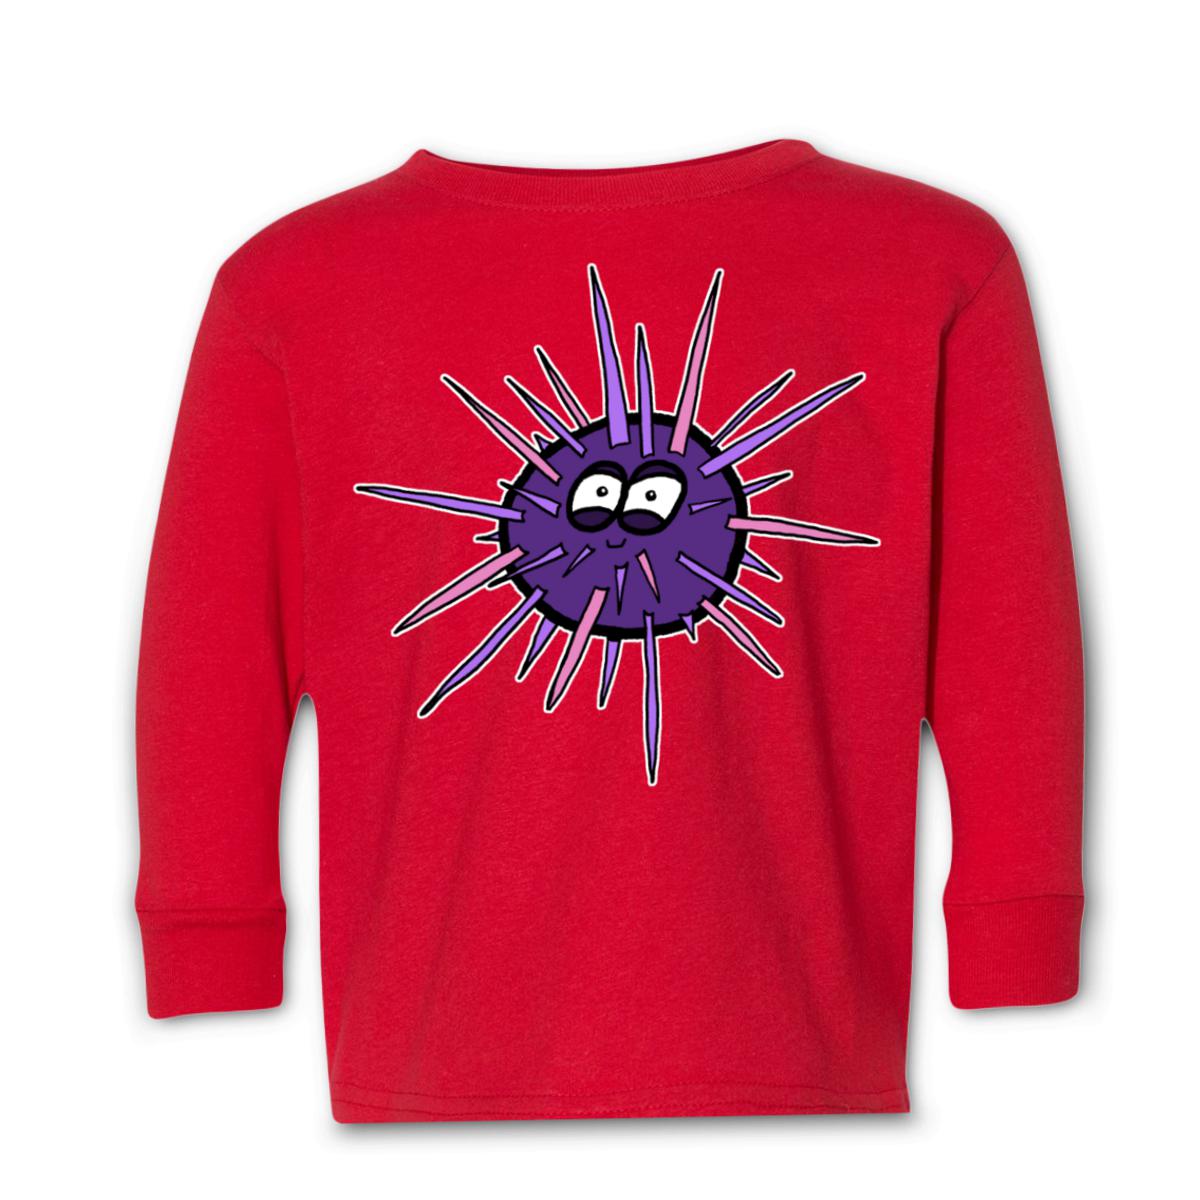 Sea Urchin Toddler Long Sleeve Tee 2T red